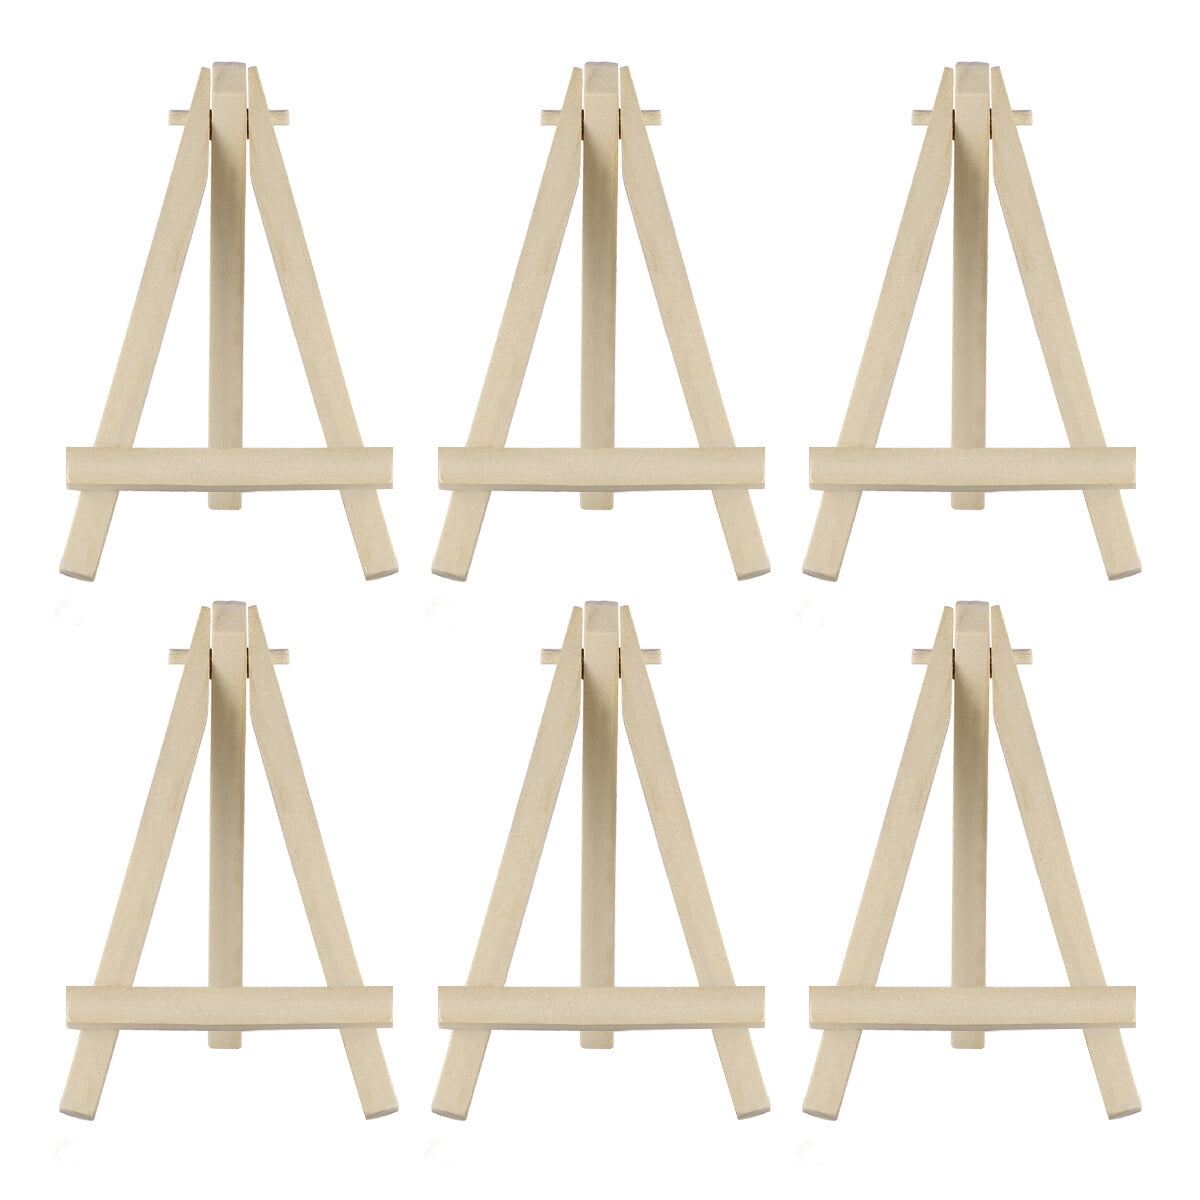 U.S. Art Supply 11\ Small Tabletop Display Stand A-Frame Artist Easel  (Pack of 6), Beechwood Tripod, Canvas Photo Holder 